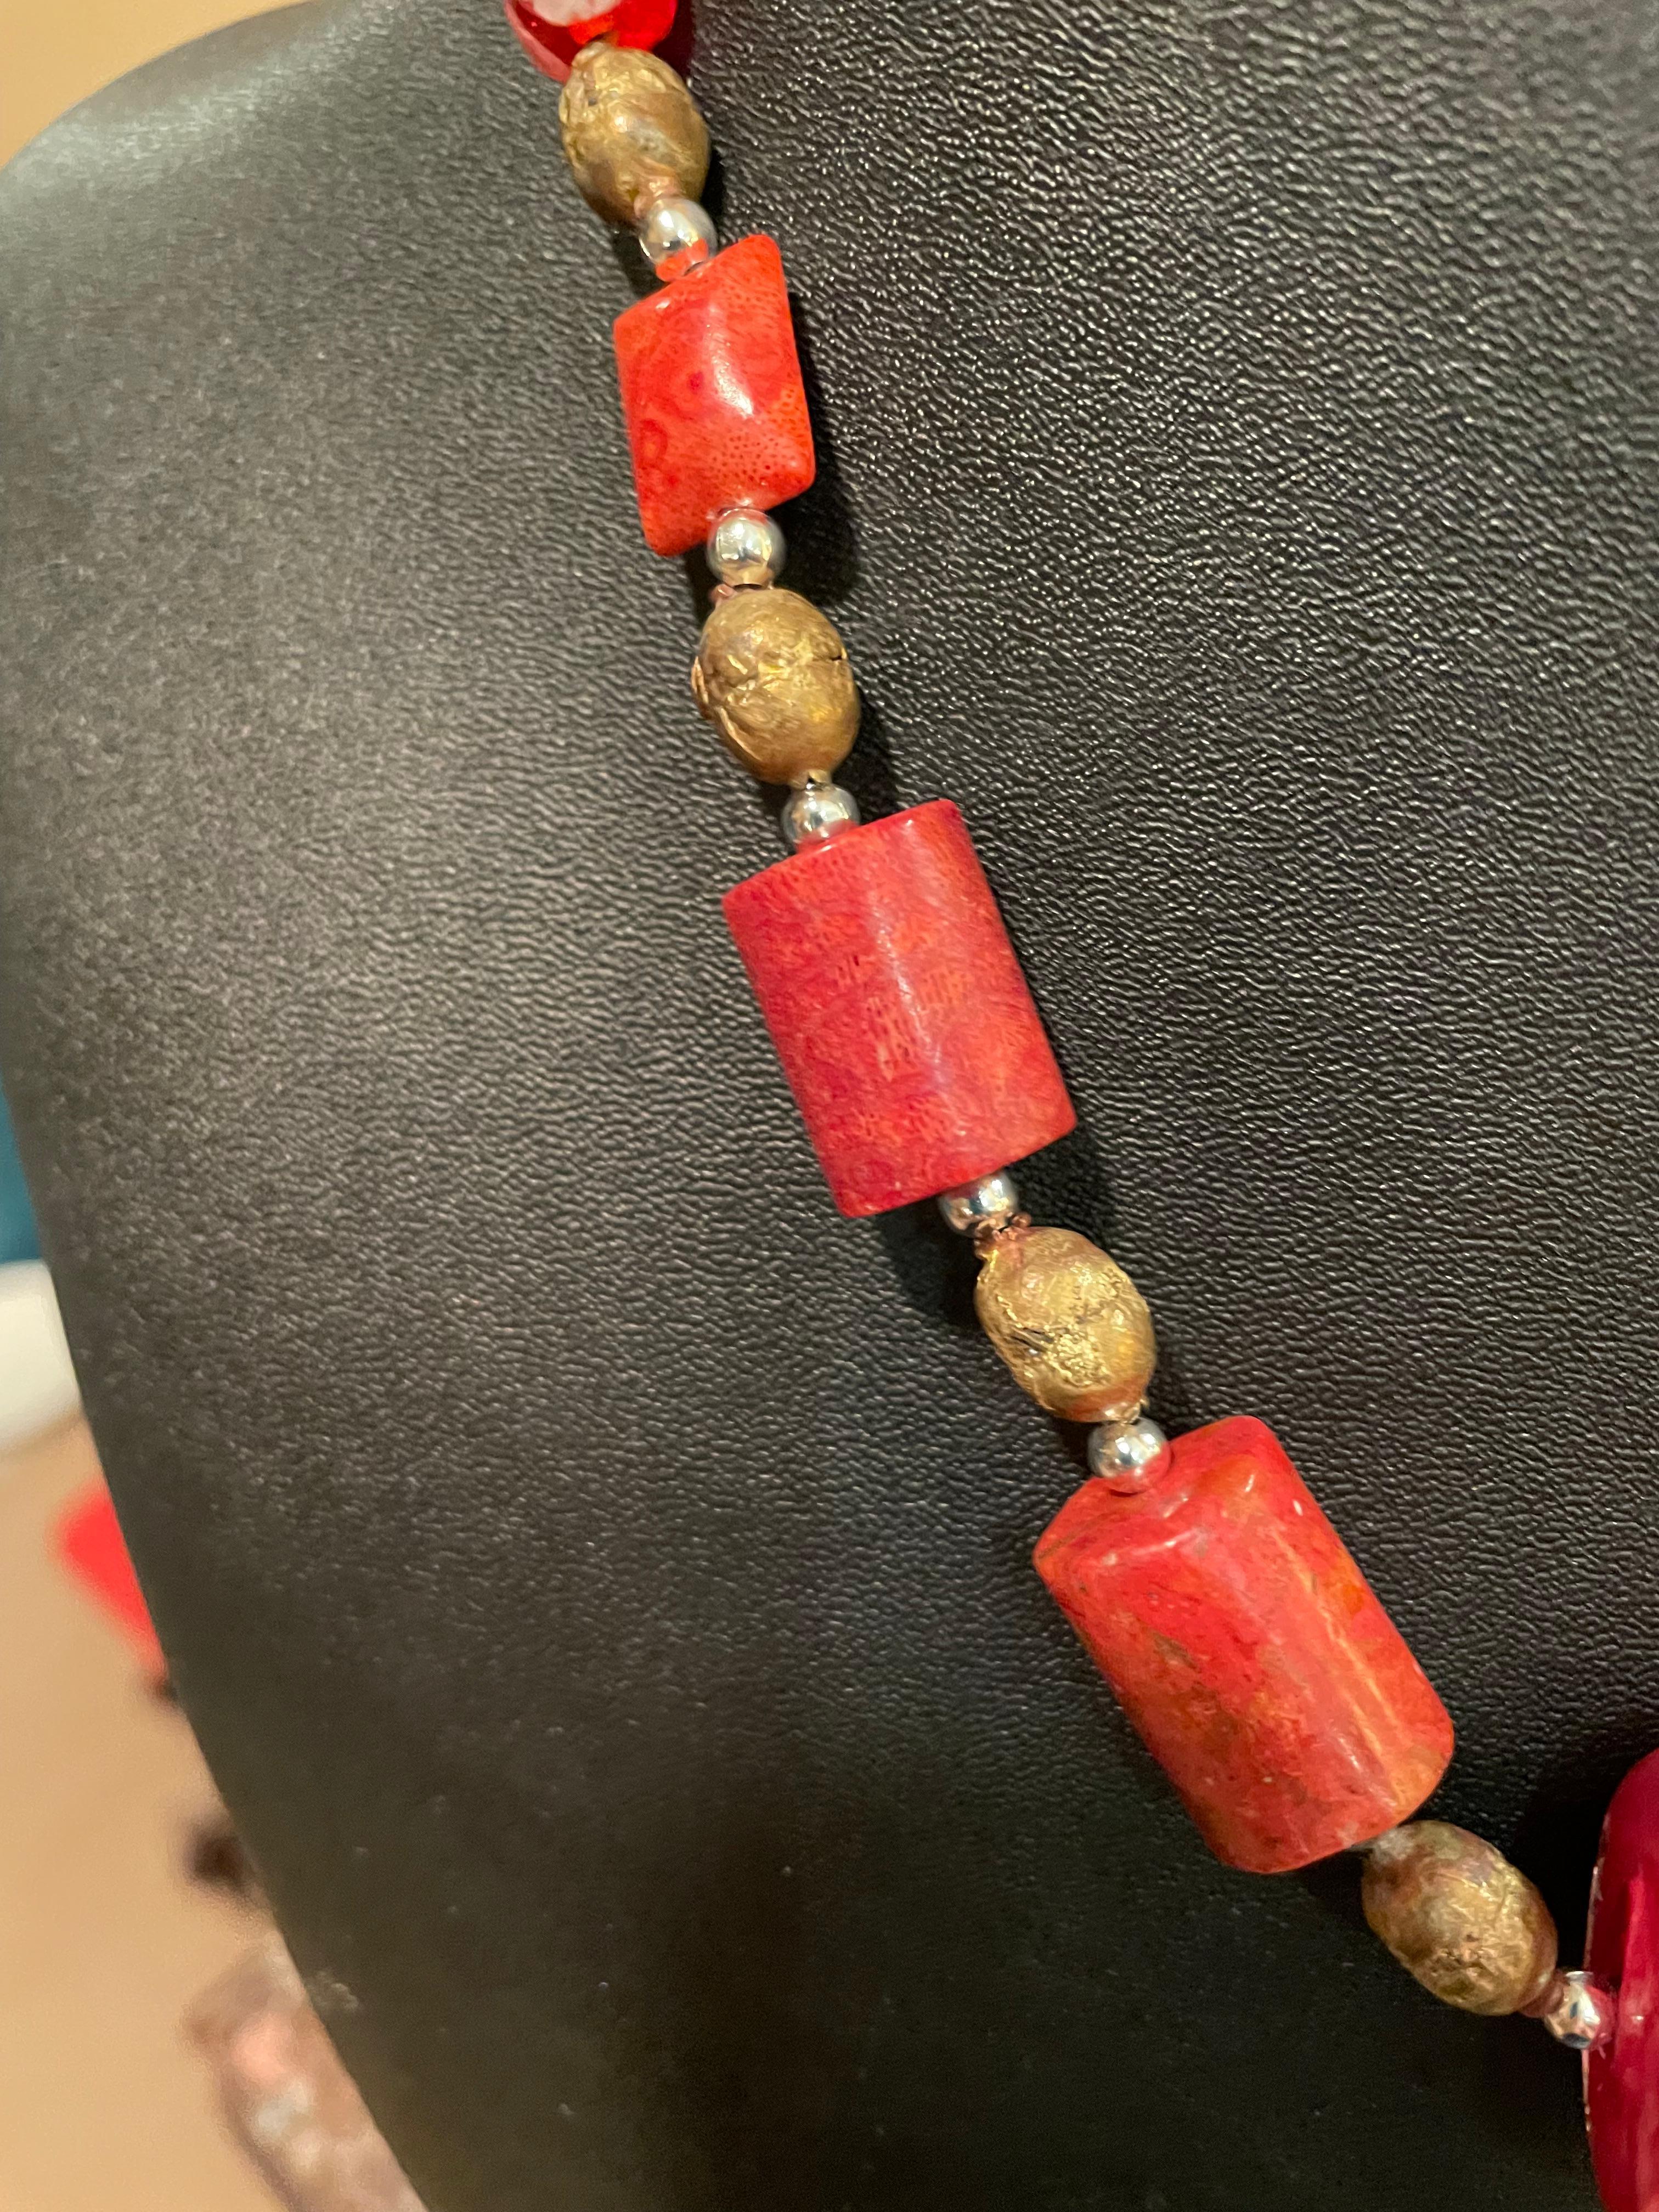 Lorraine’s Bijoux offers a handmade, one of a kind, Venetian bead and Chinese coral necklace. The center piece Venetian bead was handmade in Murano and includes both silver and gold pieces embedded in the glass. This bead is enhanced by lovely beads